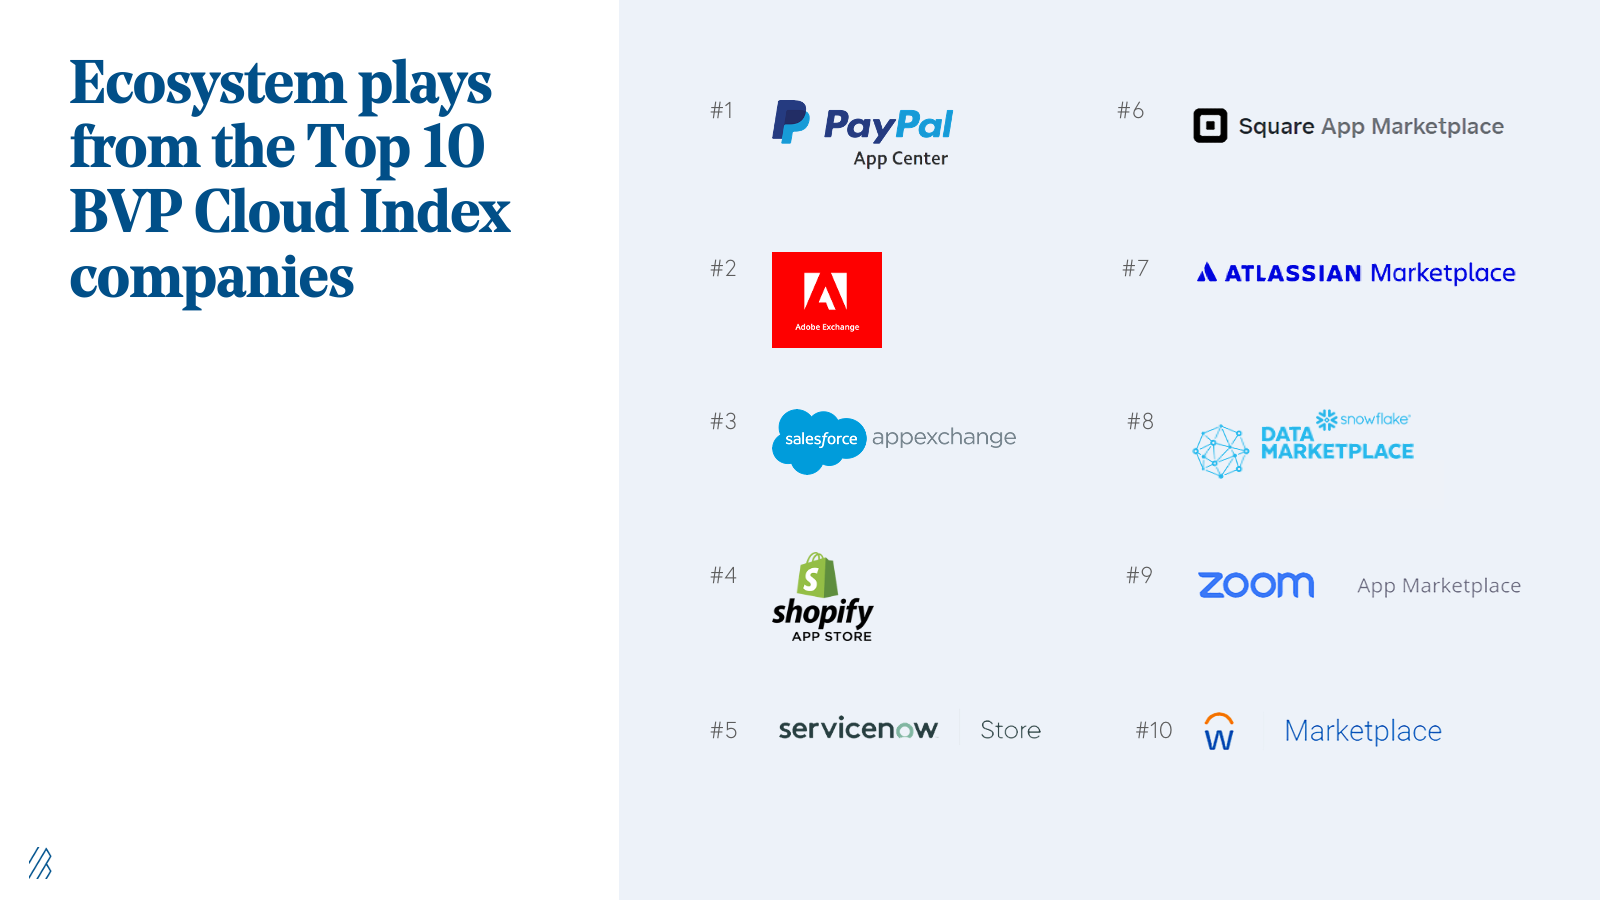 Ecosystem plays from the Top 10 BVP Cloud Index companies